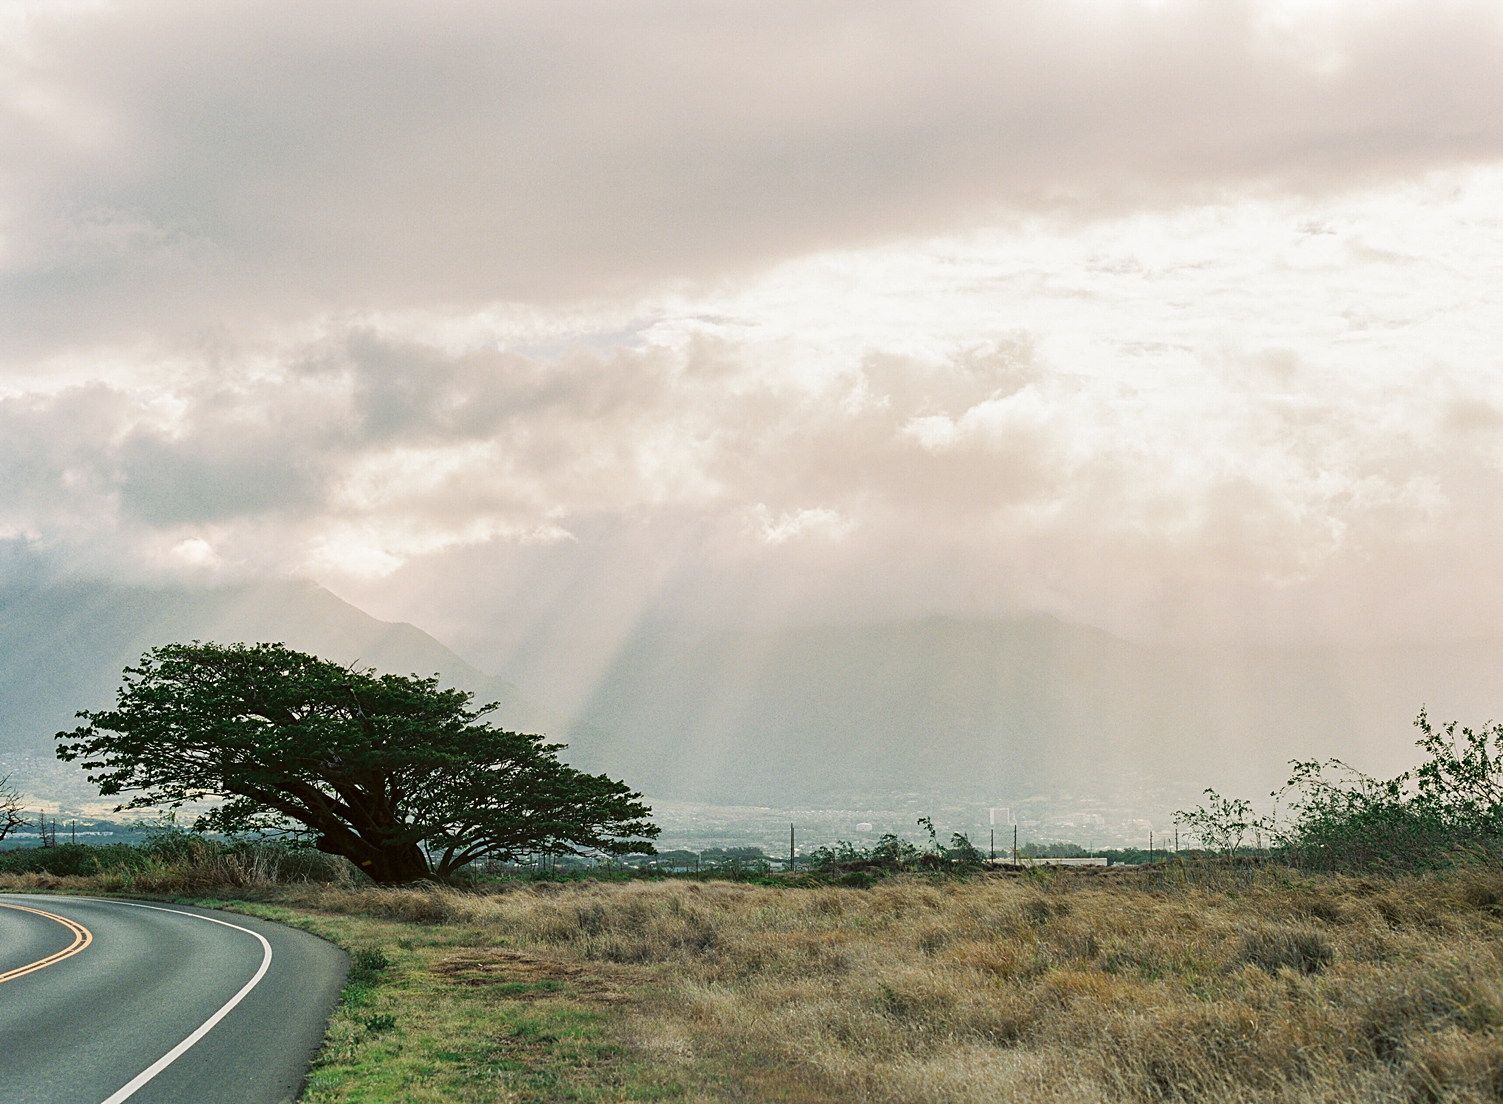 sunlight shining down on Maui tree by road on film